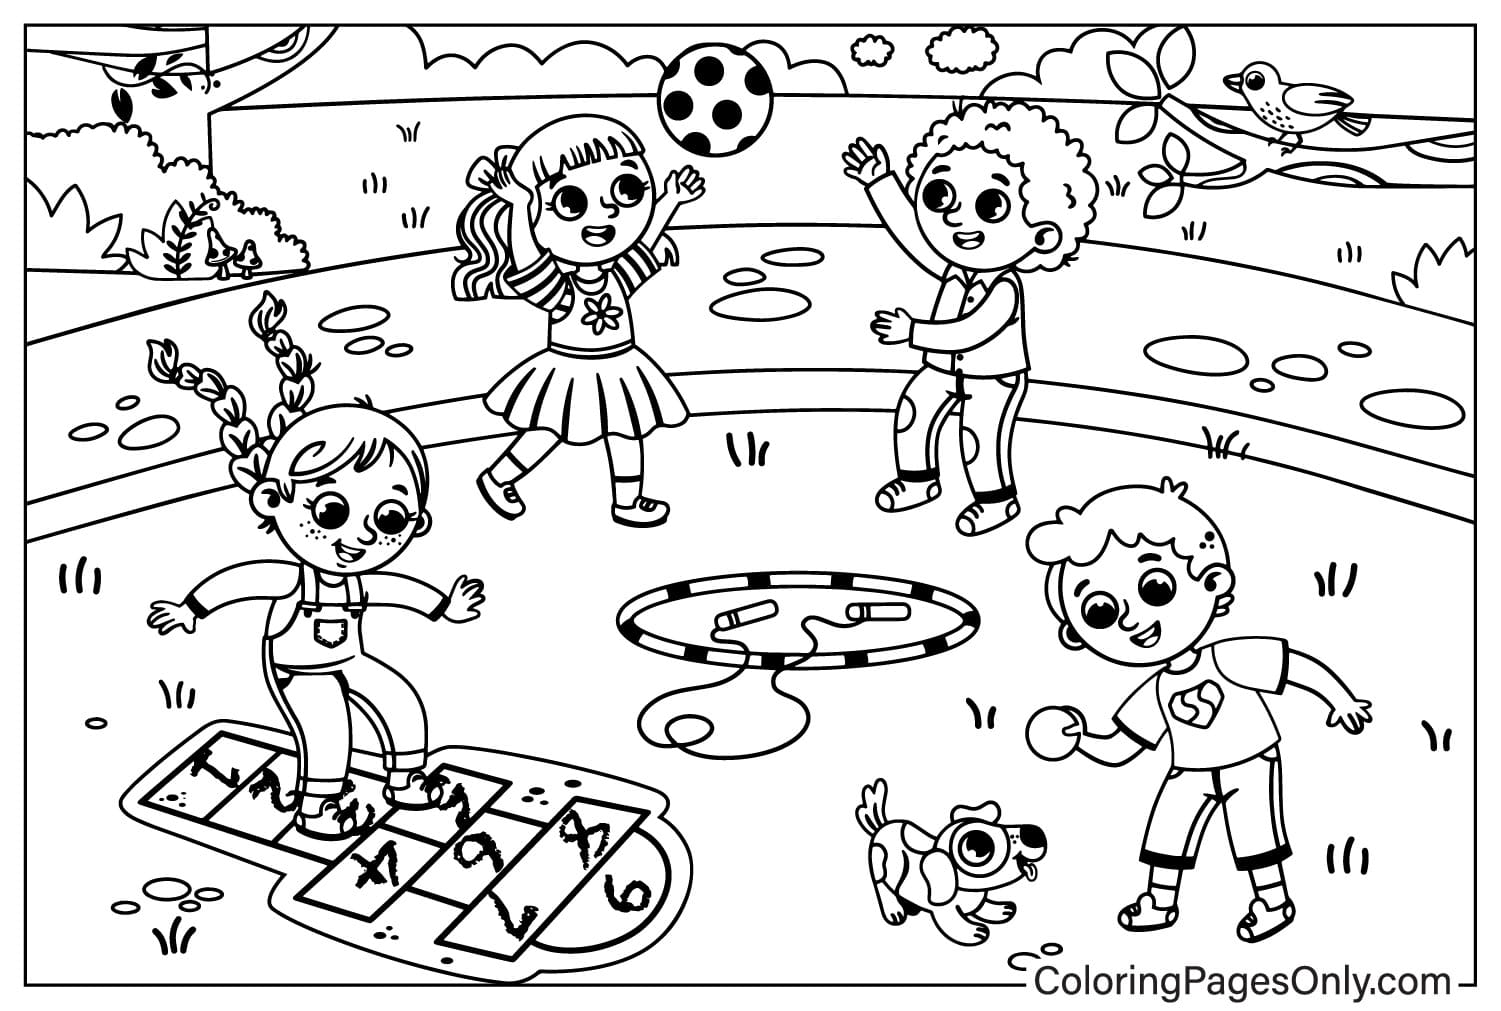 Playground Coloring Page to Printable from Playground